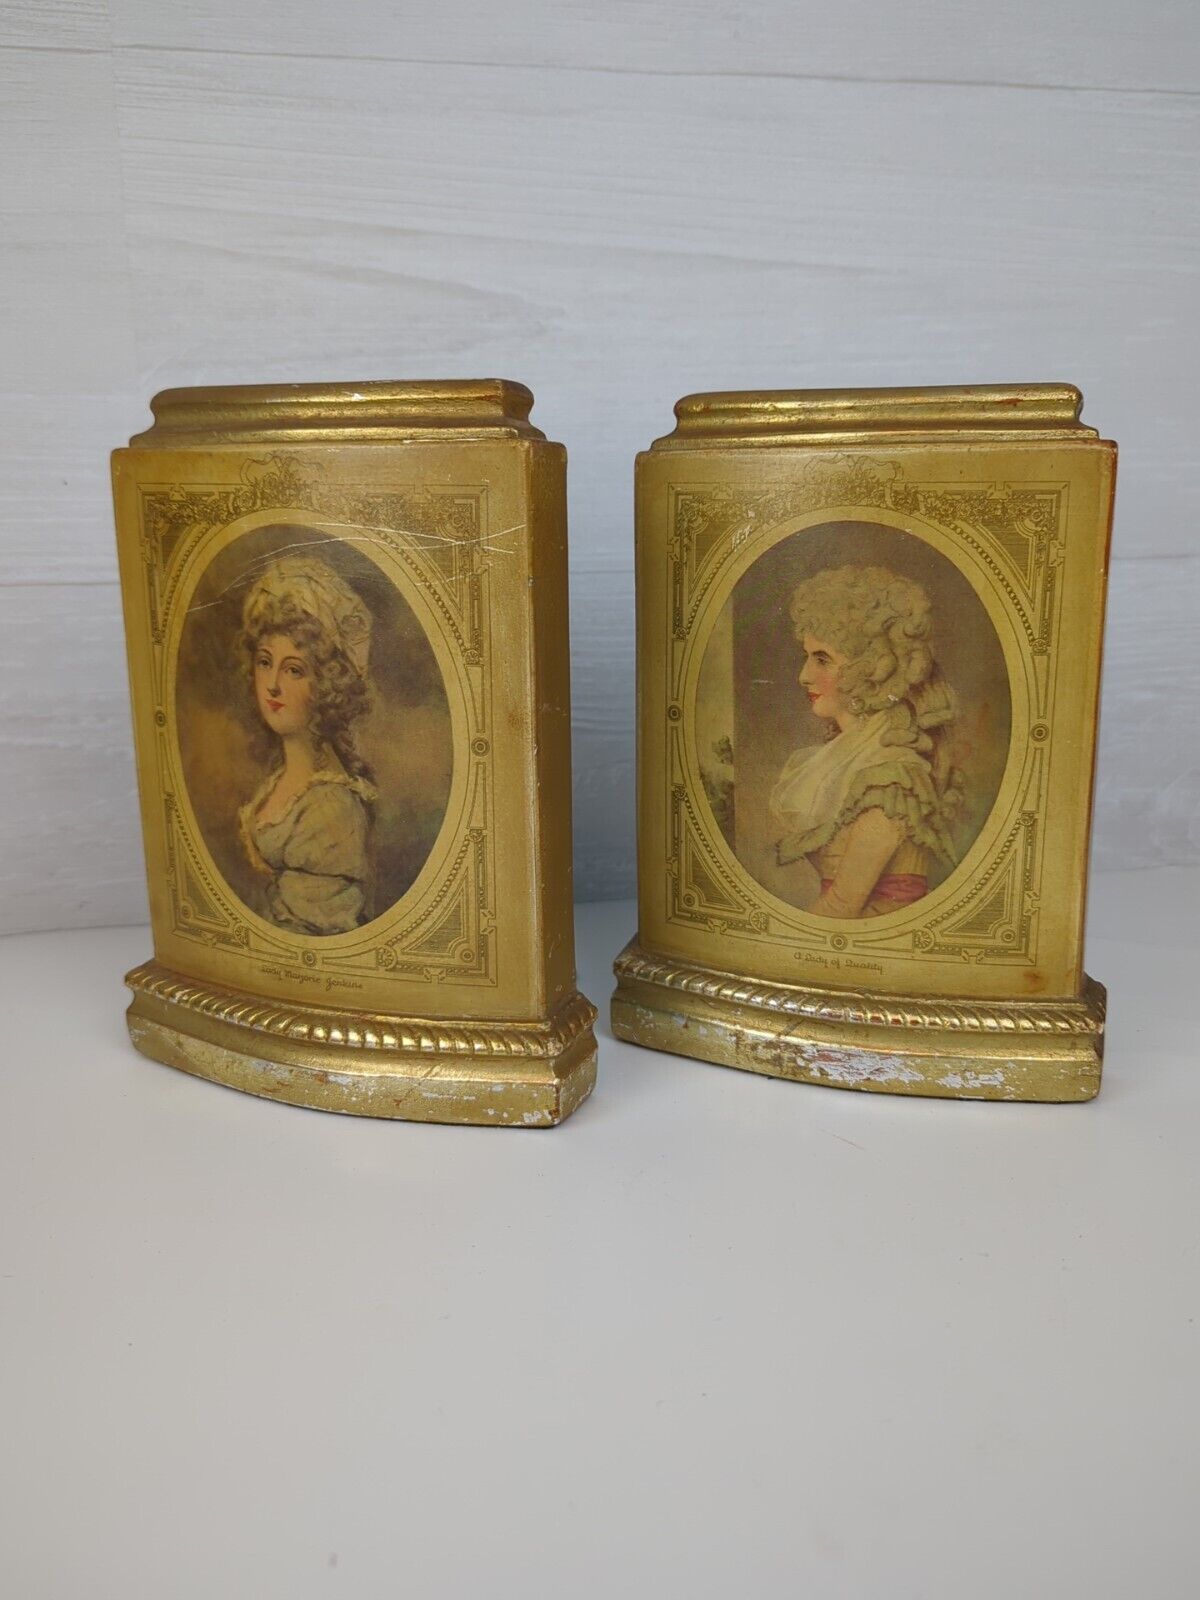 VINTAGE VICTORIAN BORGHESE GOLD GILT LADIES BOOKENDS Hollywood Regency